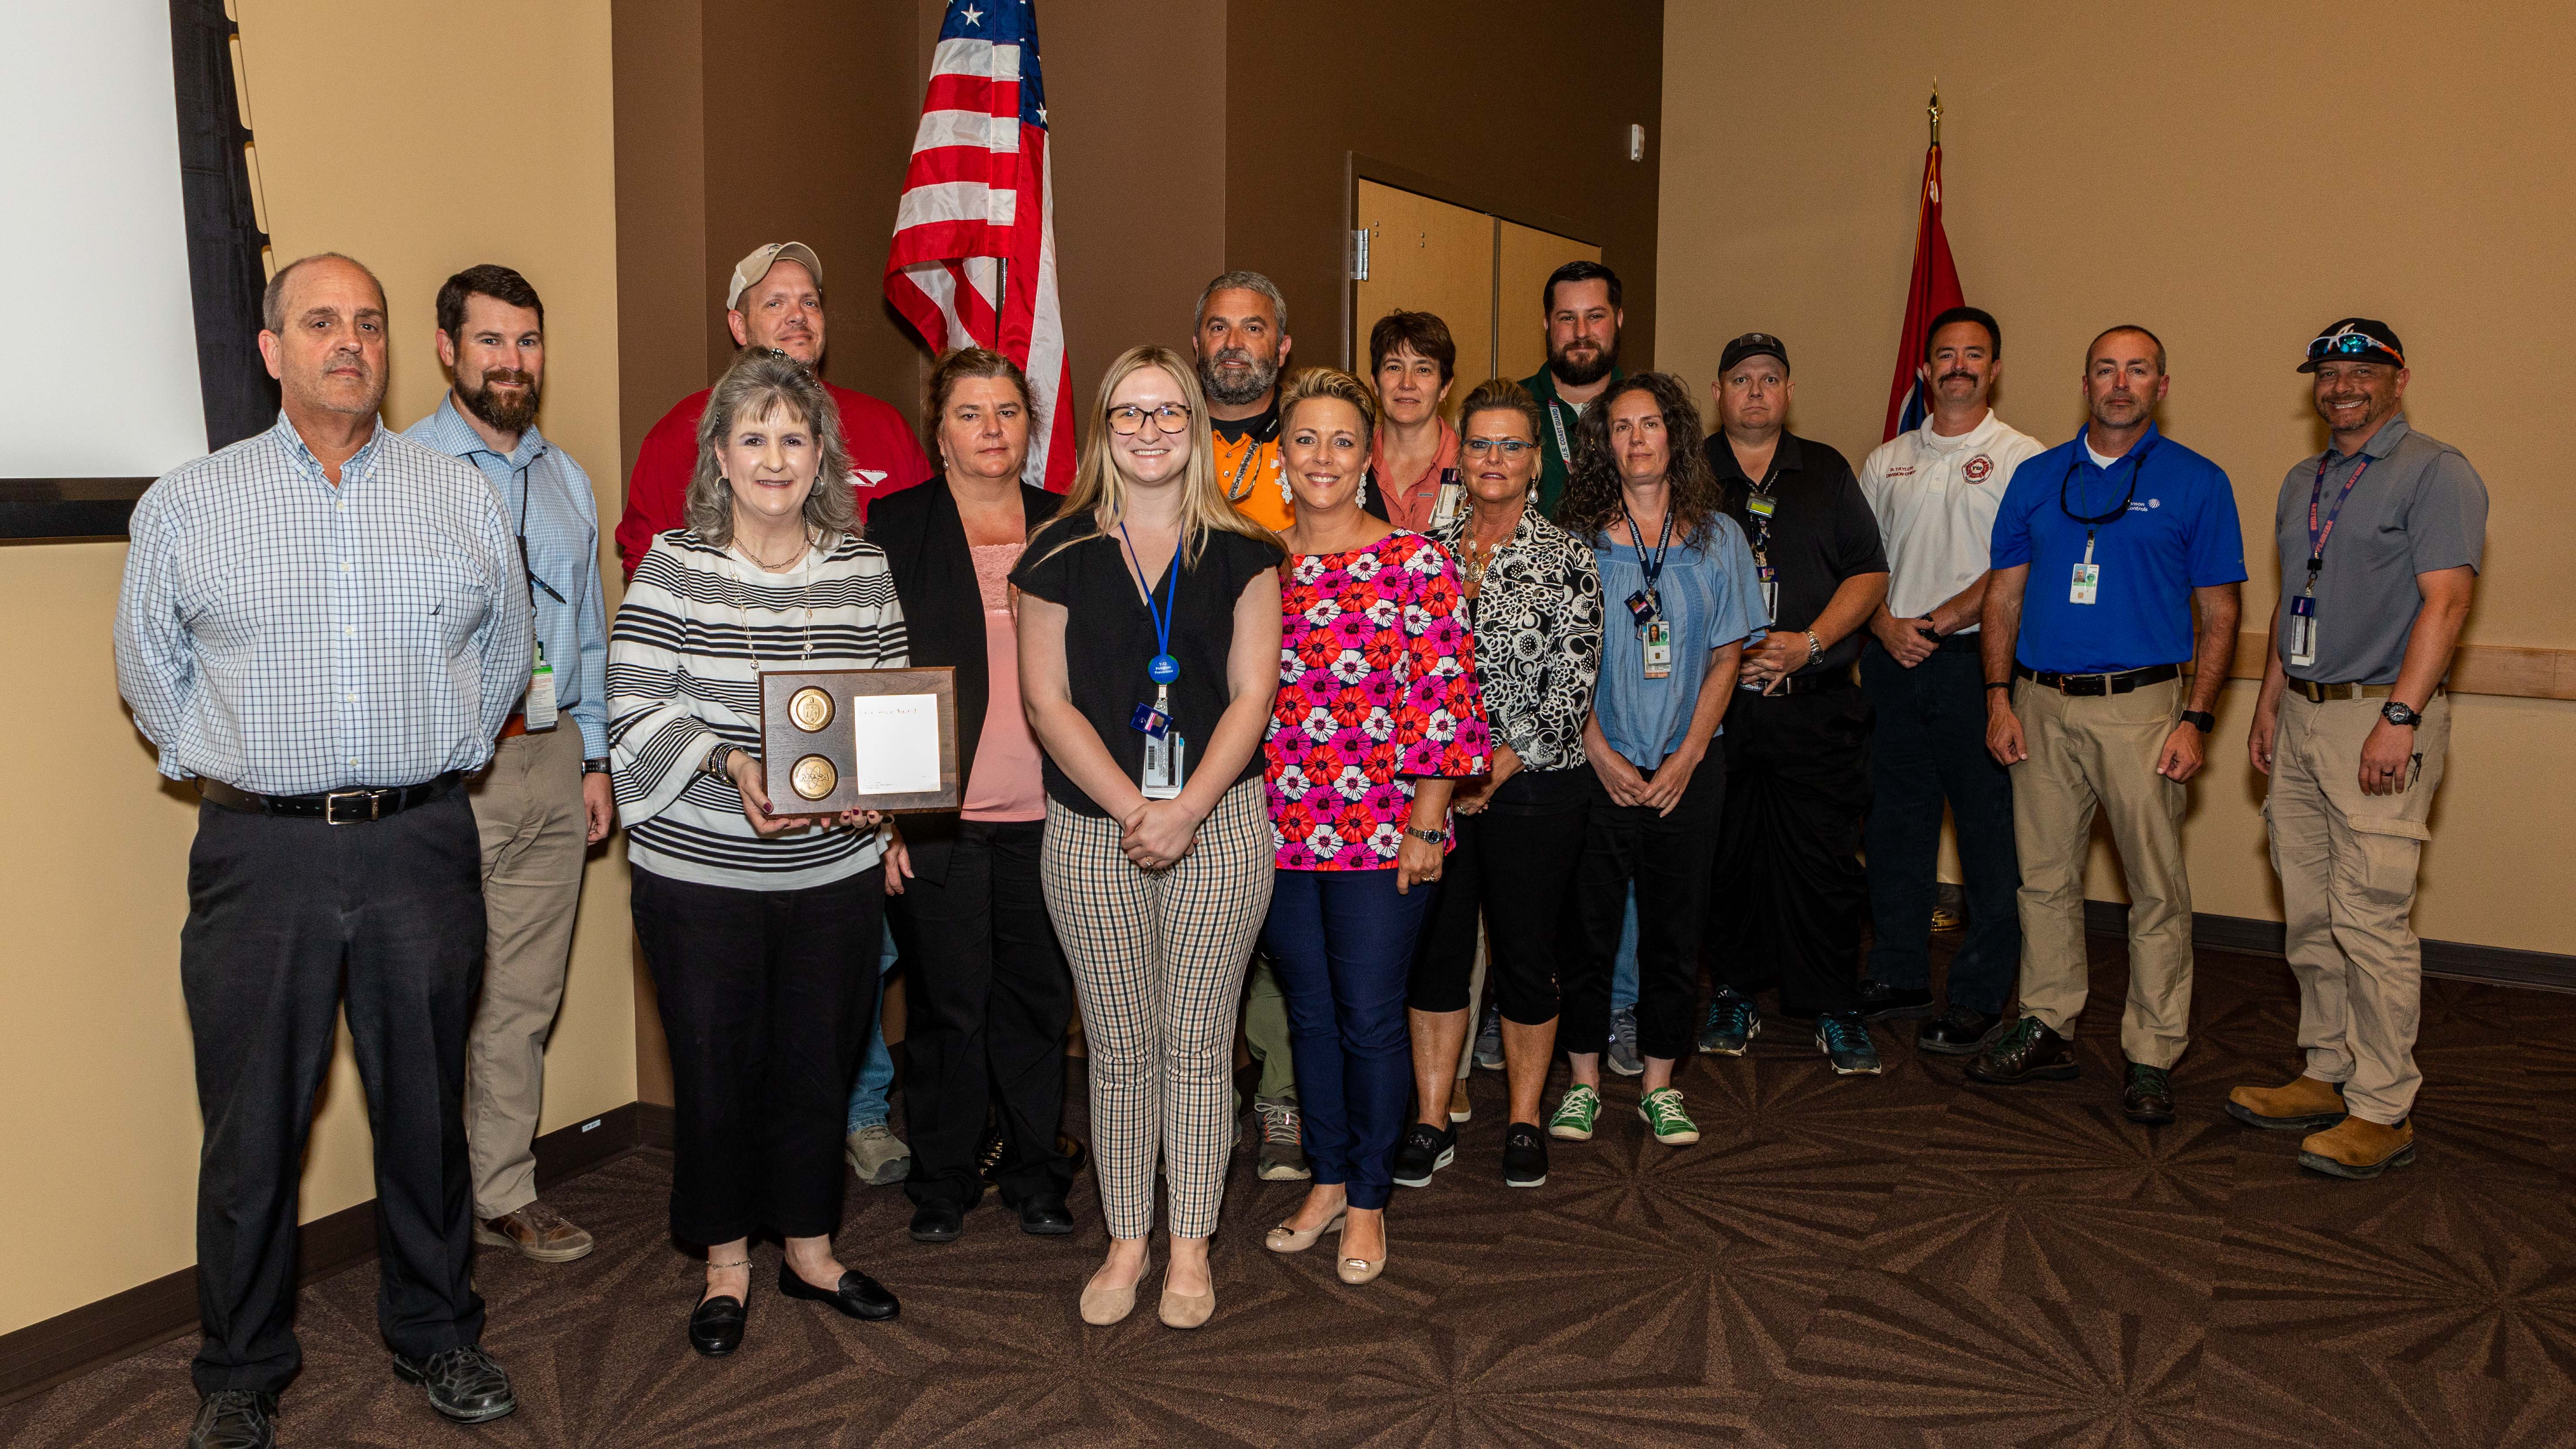 Focusing on energy resilience and climate readiness by creating an integrated site response to NNSA’s Energy Resilient Infrastructure and Climate Adaptation Initiative earned this team an Award of Excellence.